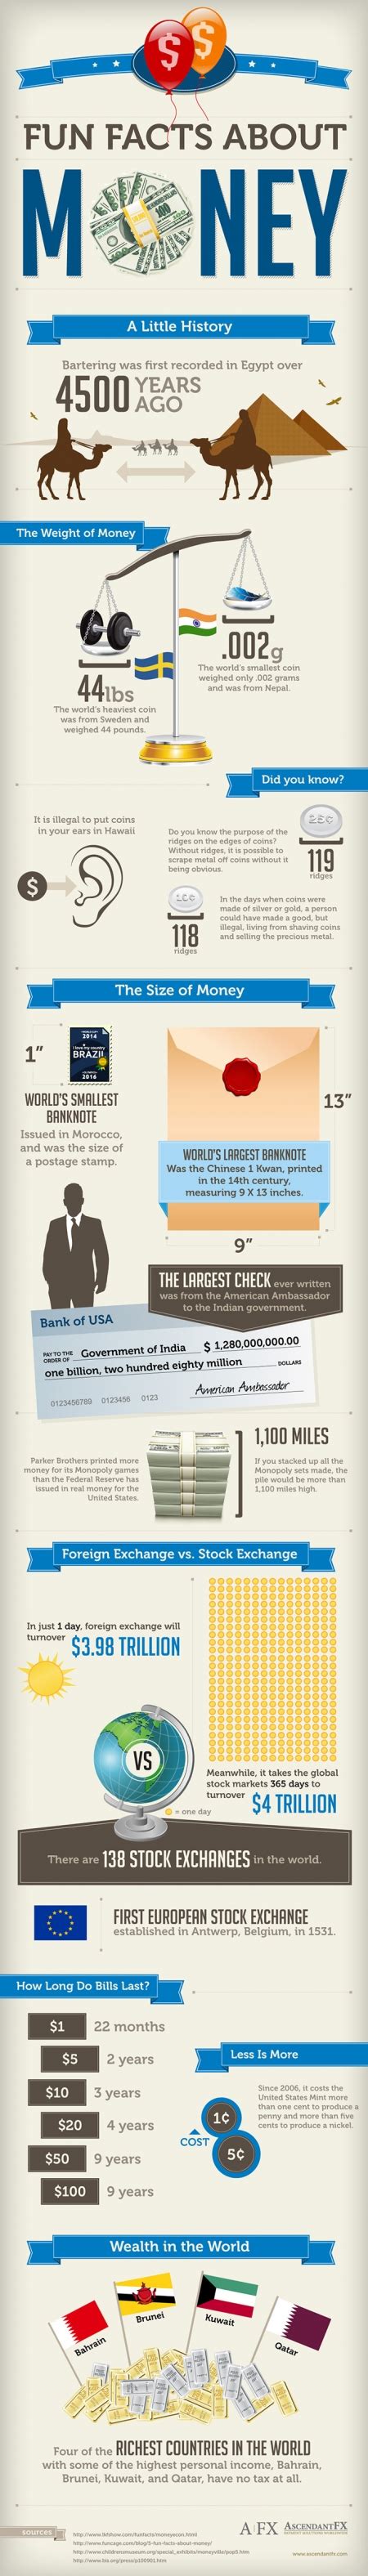 Fun Facts About Money